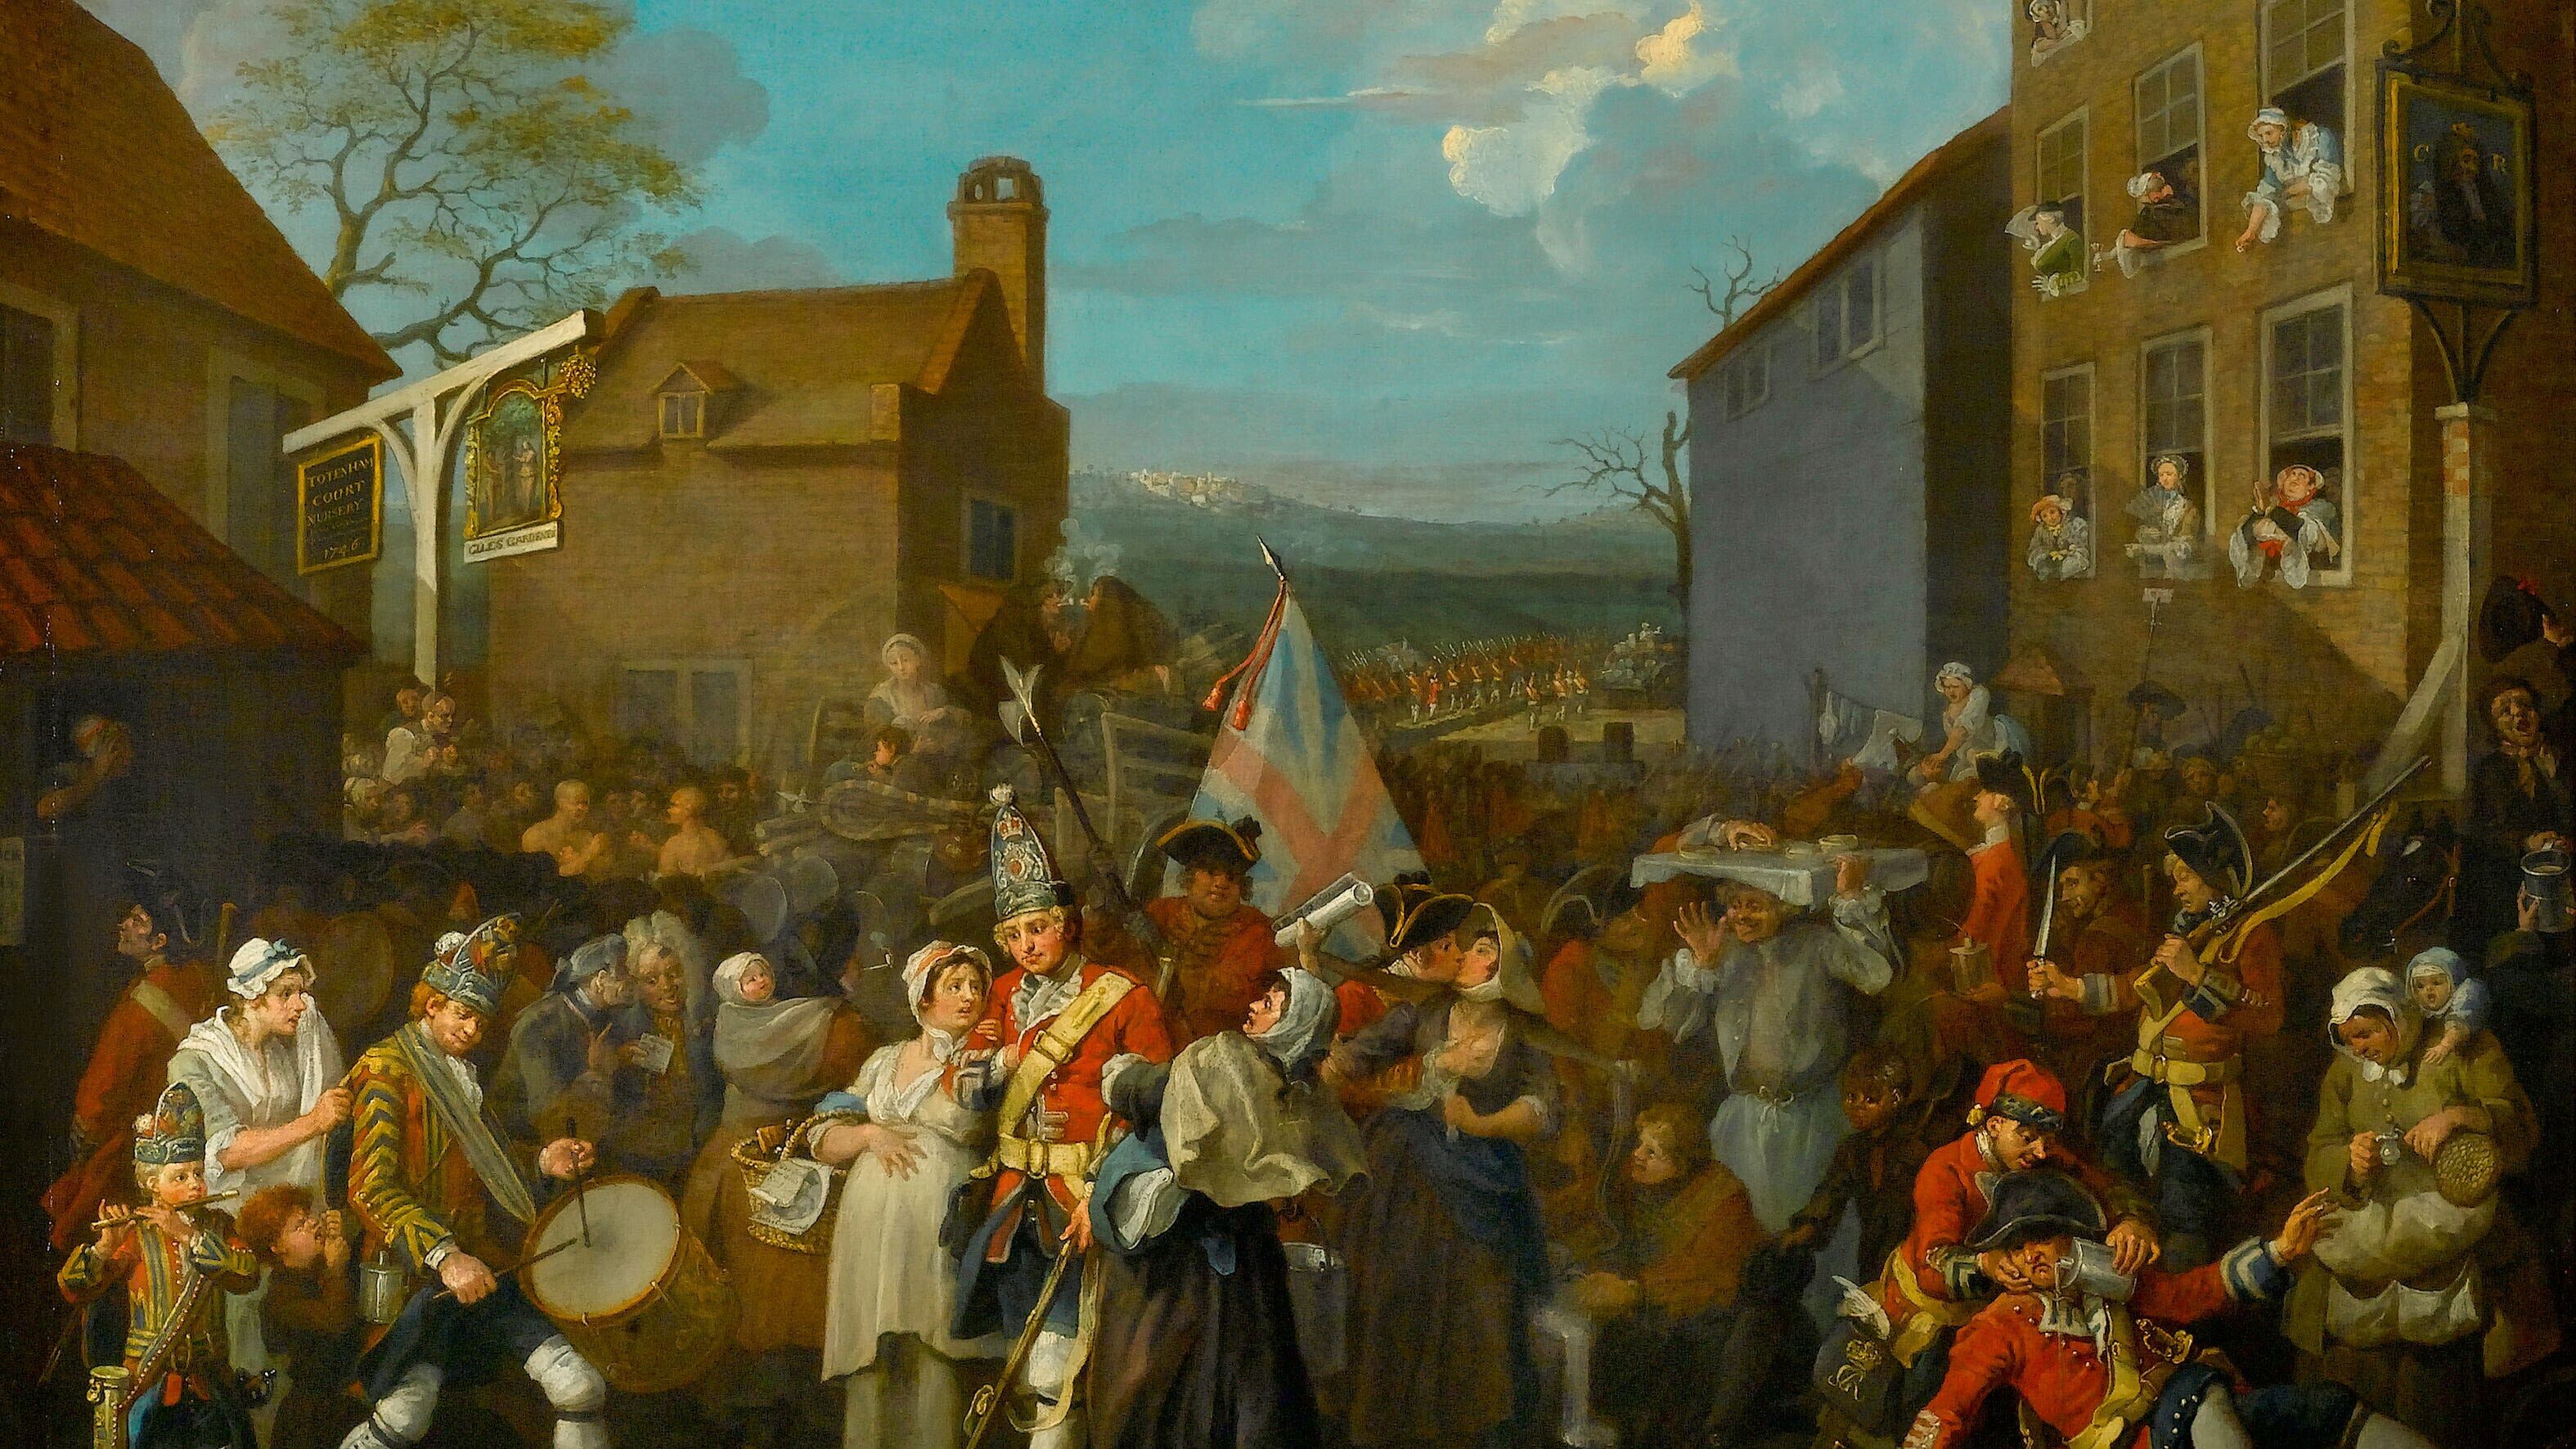 The display focuses on the British artist and his reaction to the 1745 Jacobite Uprising.